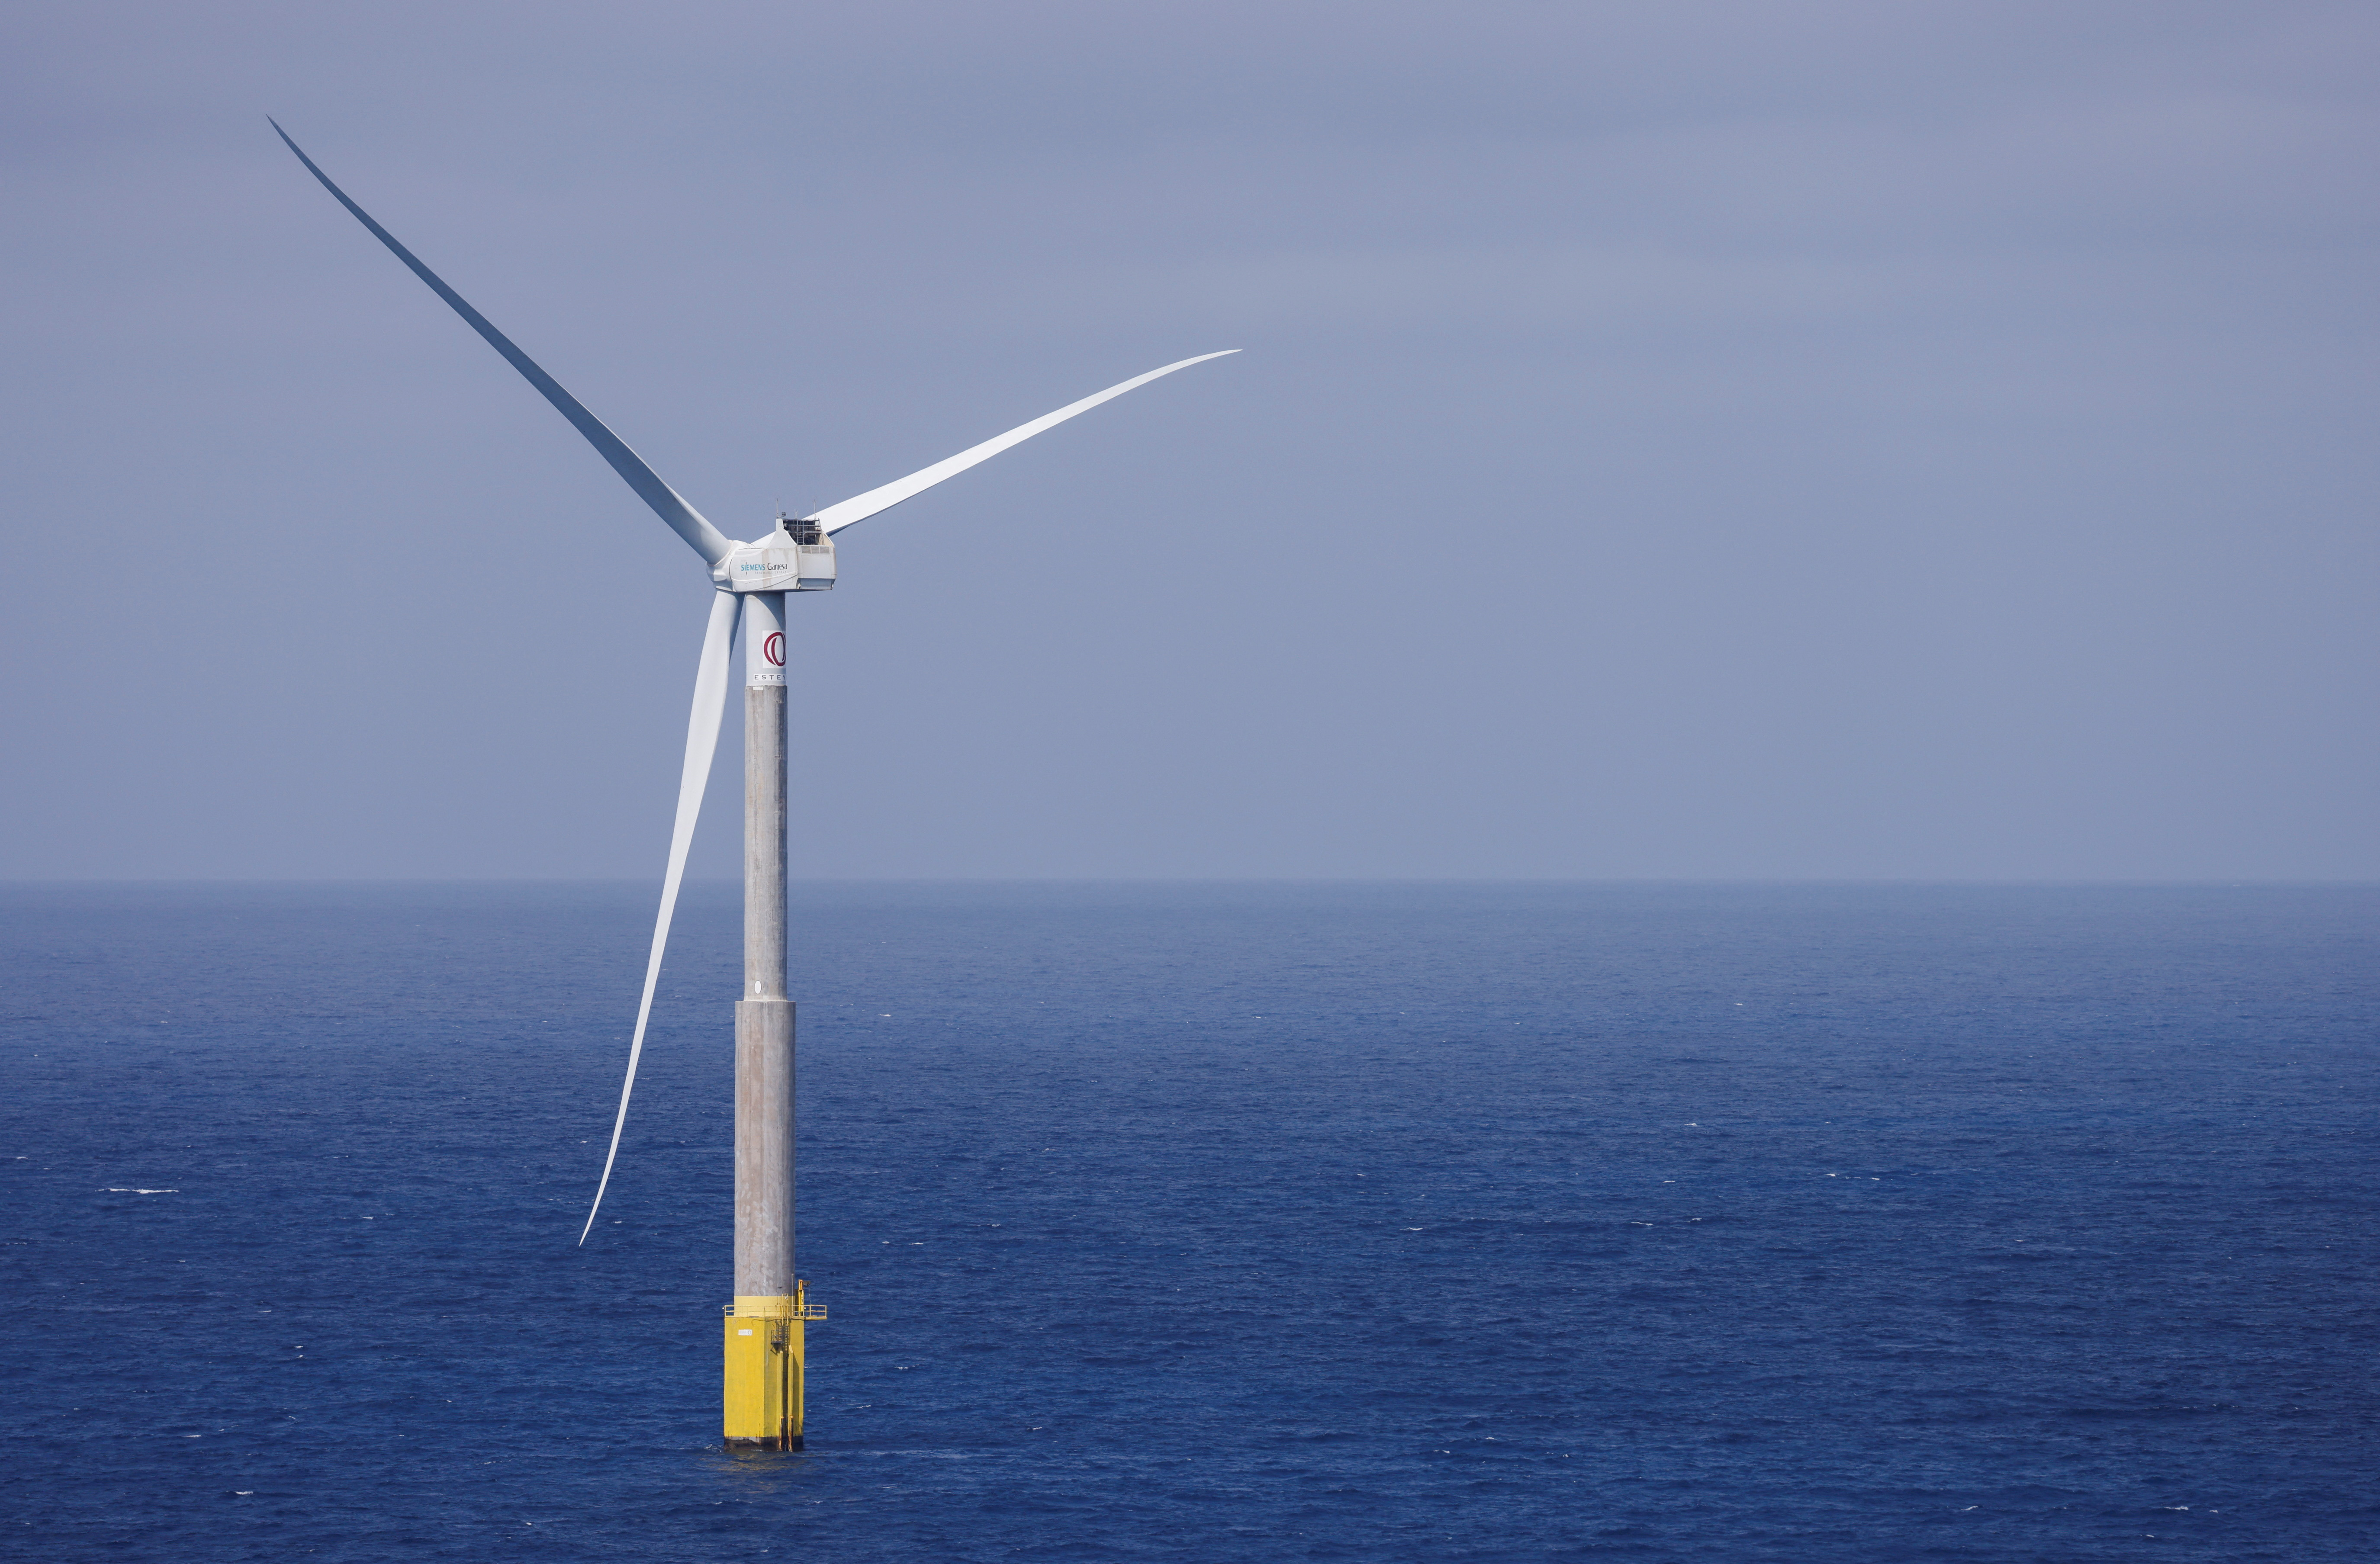 An offshore wind turbine of the Siemens Gamesa company is seen from the Telde coast on the island of Gran Canaria